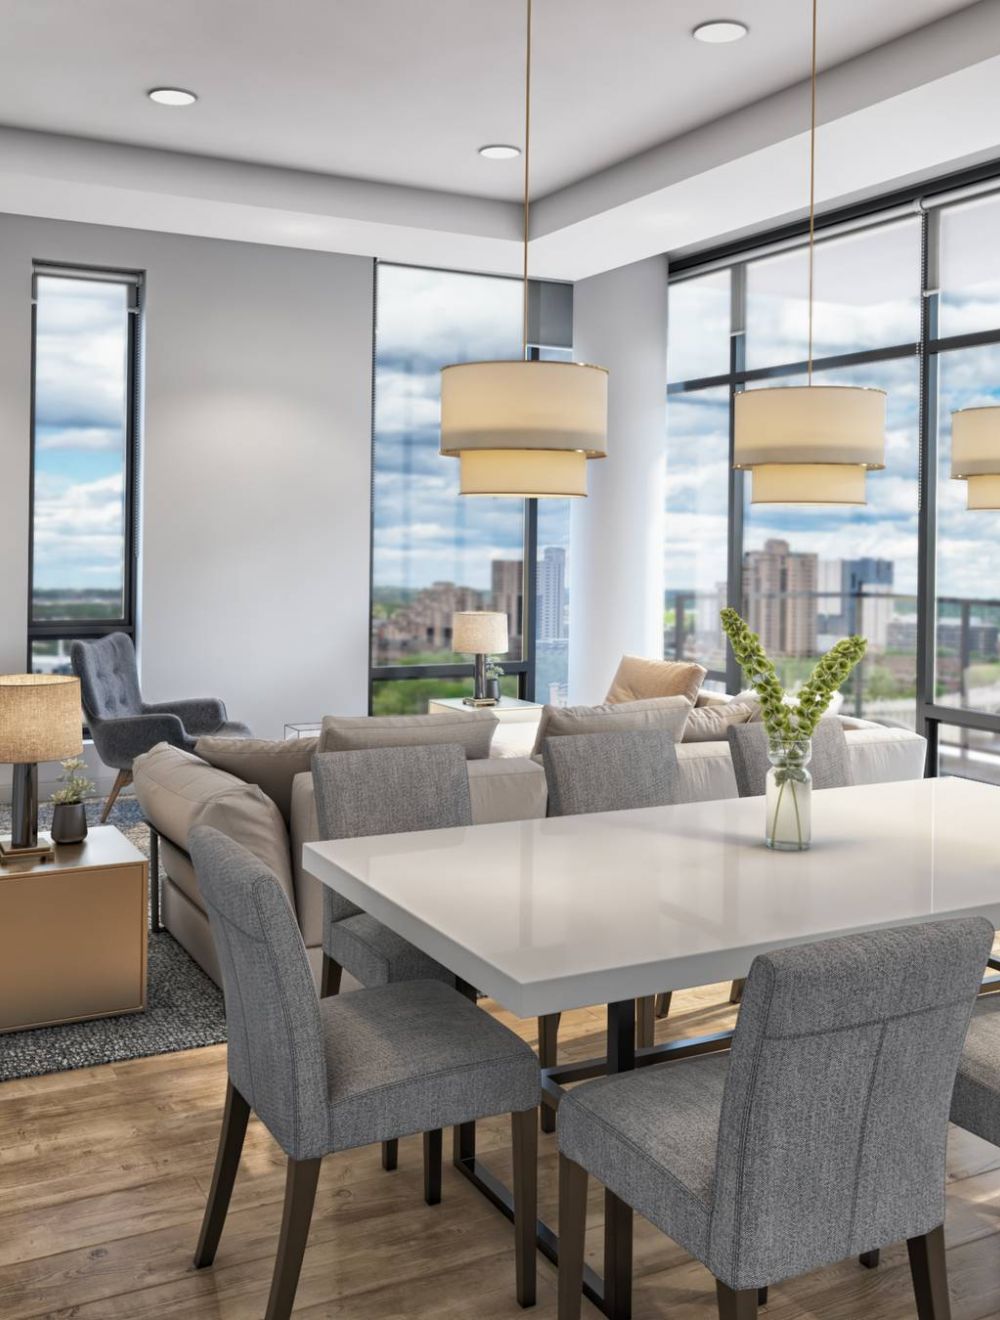 O2 Luxury Towers apartments penthouse living room with hardwood floor, fireplace, and open-floor plan layout.